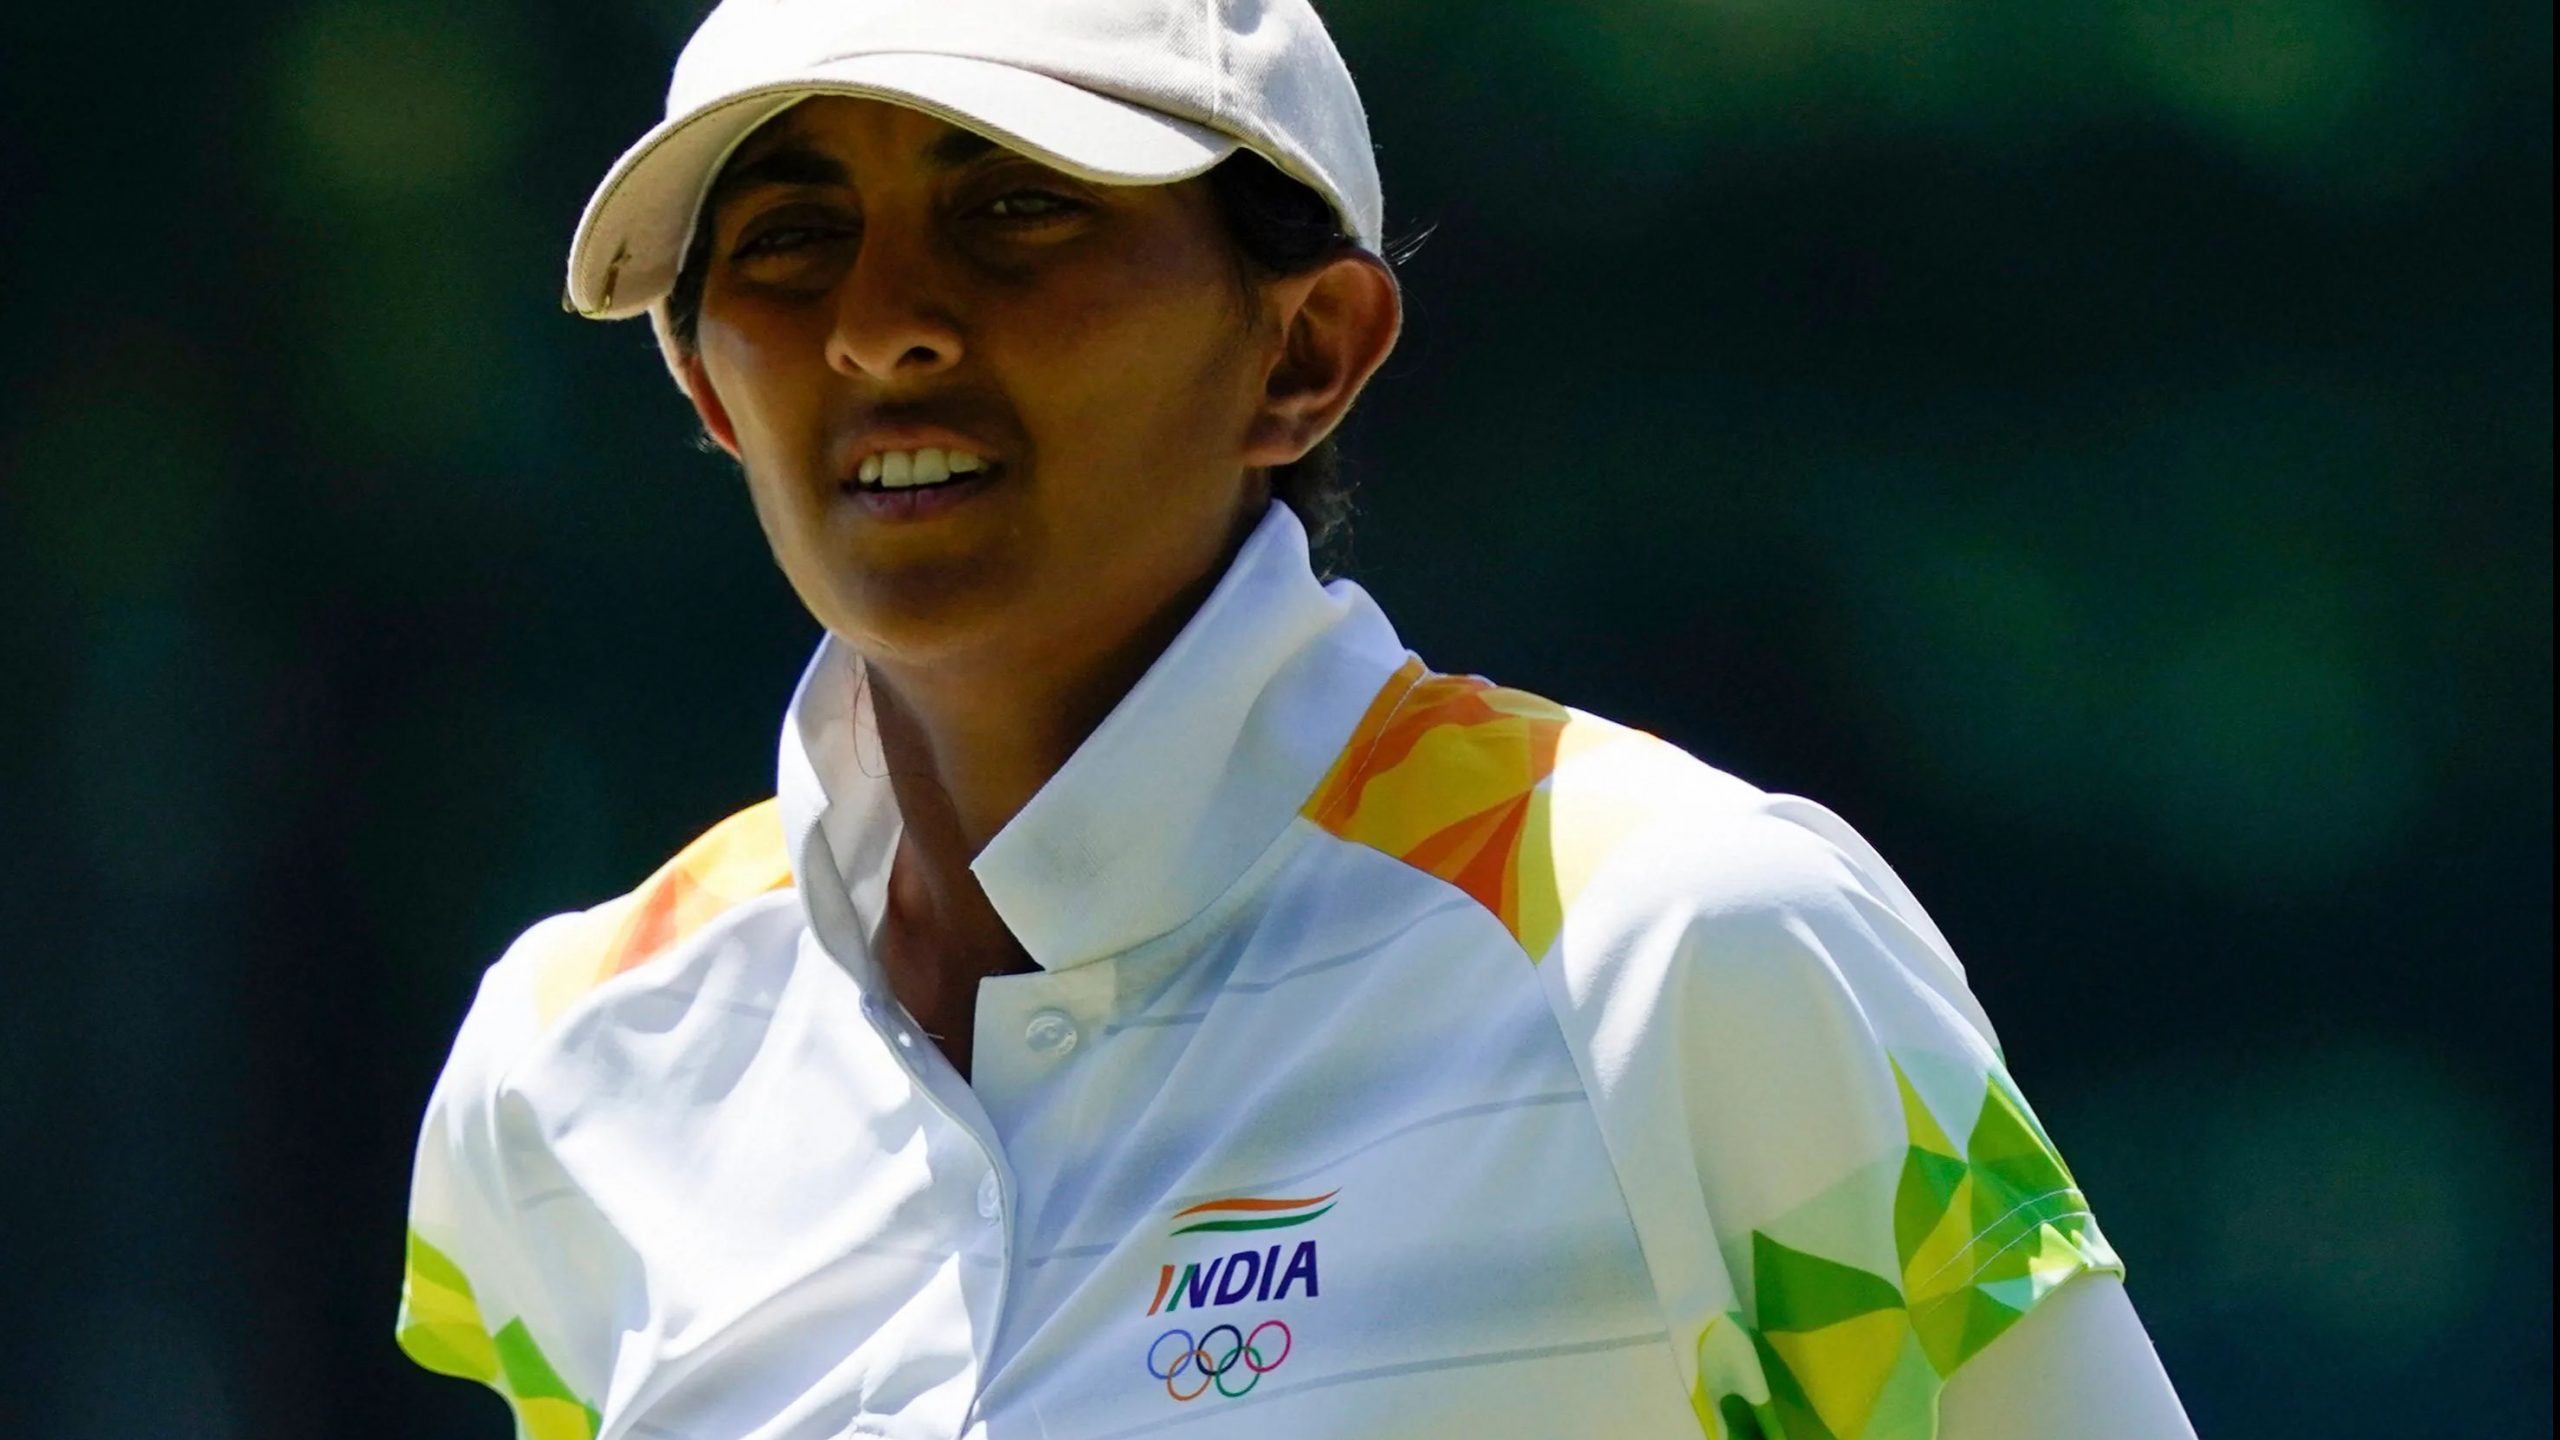 Tokyo Olympics: Golfer Aditi Ashok in medal contention, at 2nd spot after round 2